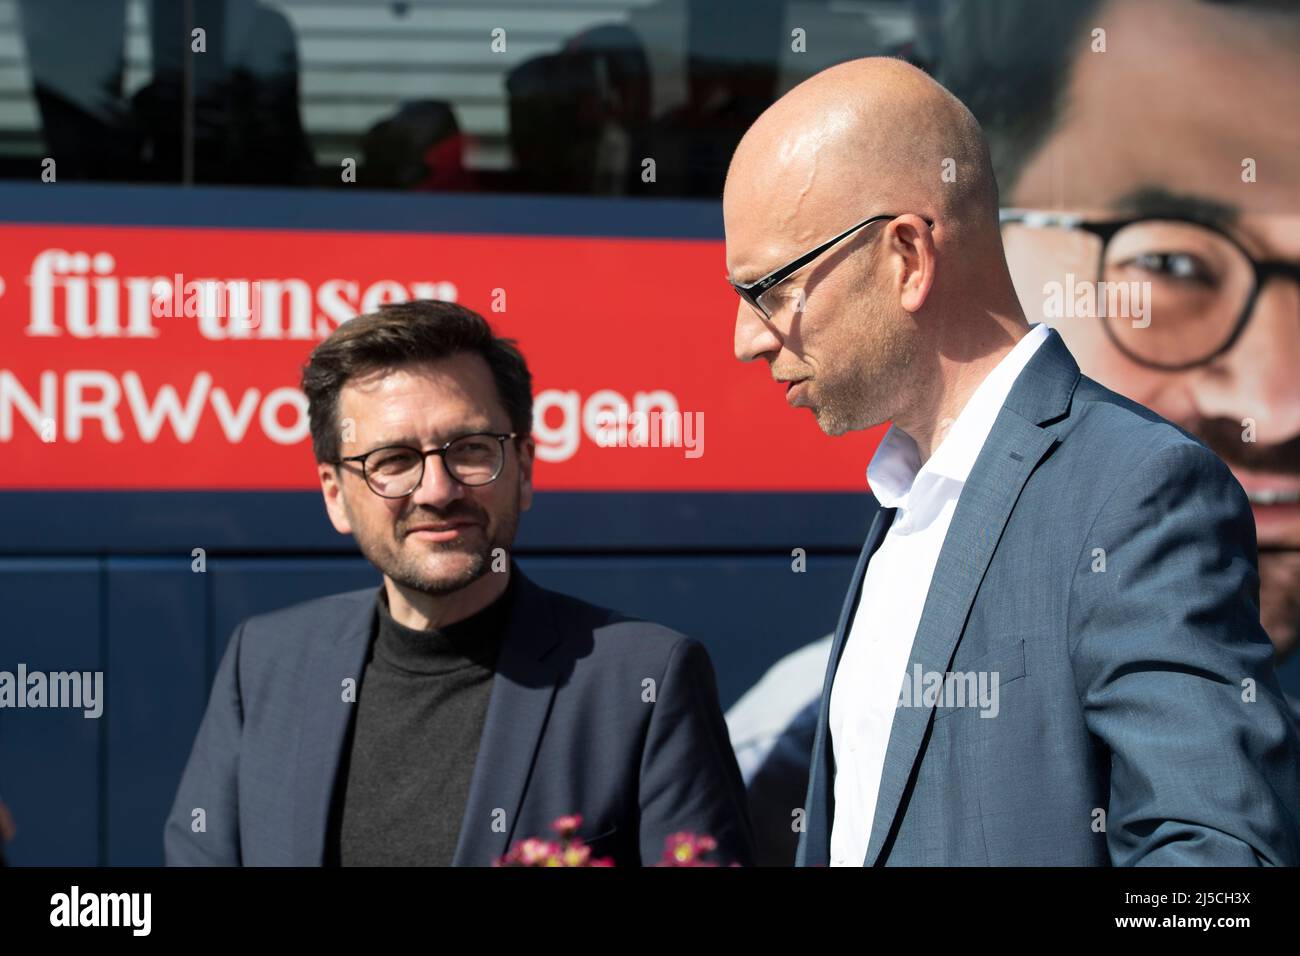 Thomas KUTSCHATY, top candidate of the NRW SPD and chairman of the SPD state parliamentary group, and SPD top candidate for the 2022 state elections, and the local constituency candidate Christian OBROK, in Kirchlengern/Stift Quernheim on April 20th, 2022. Stock Photo